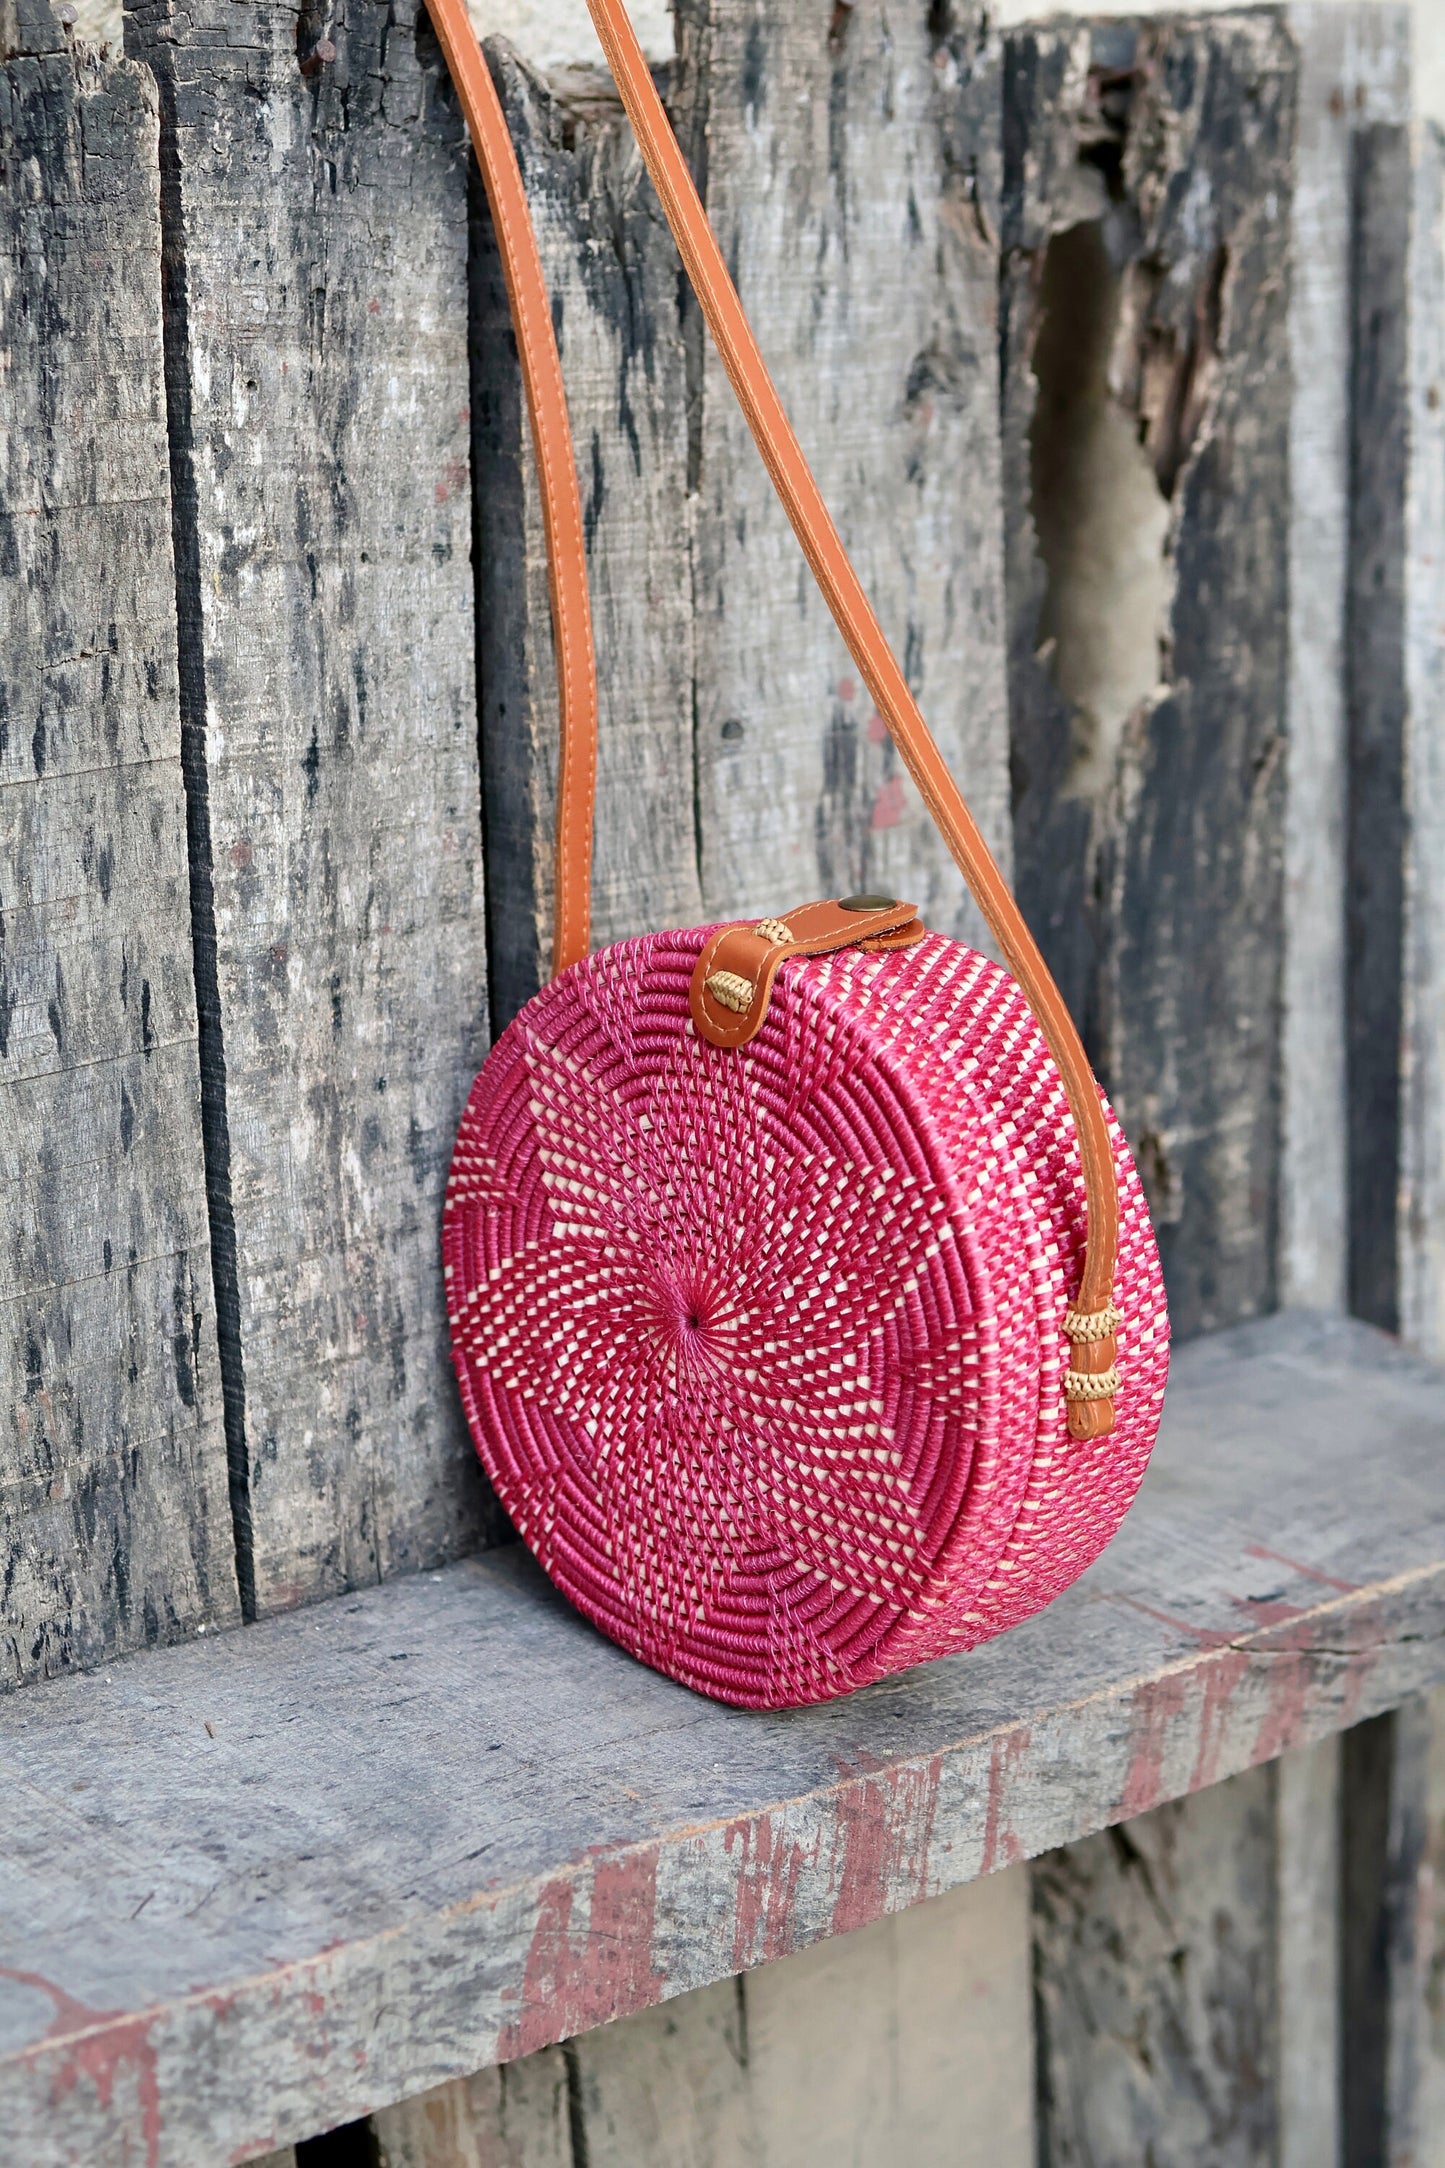 Round Rattan Bag with Flower Weaving, Bali Bag Handwoven Crossbody Purse, Braided Straw Bag, Bali Sling Bags, Rattan Bags, Gift for her